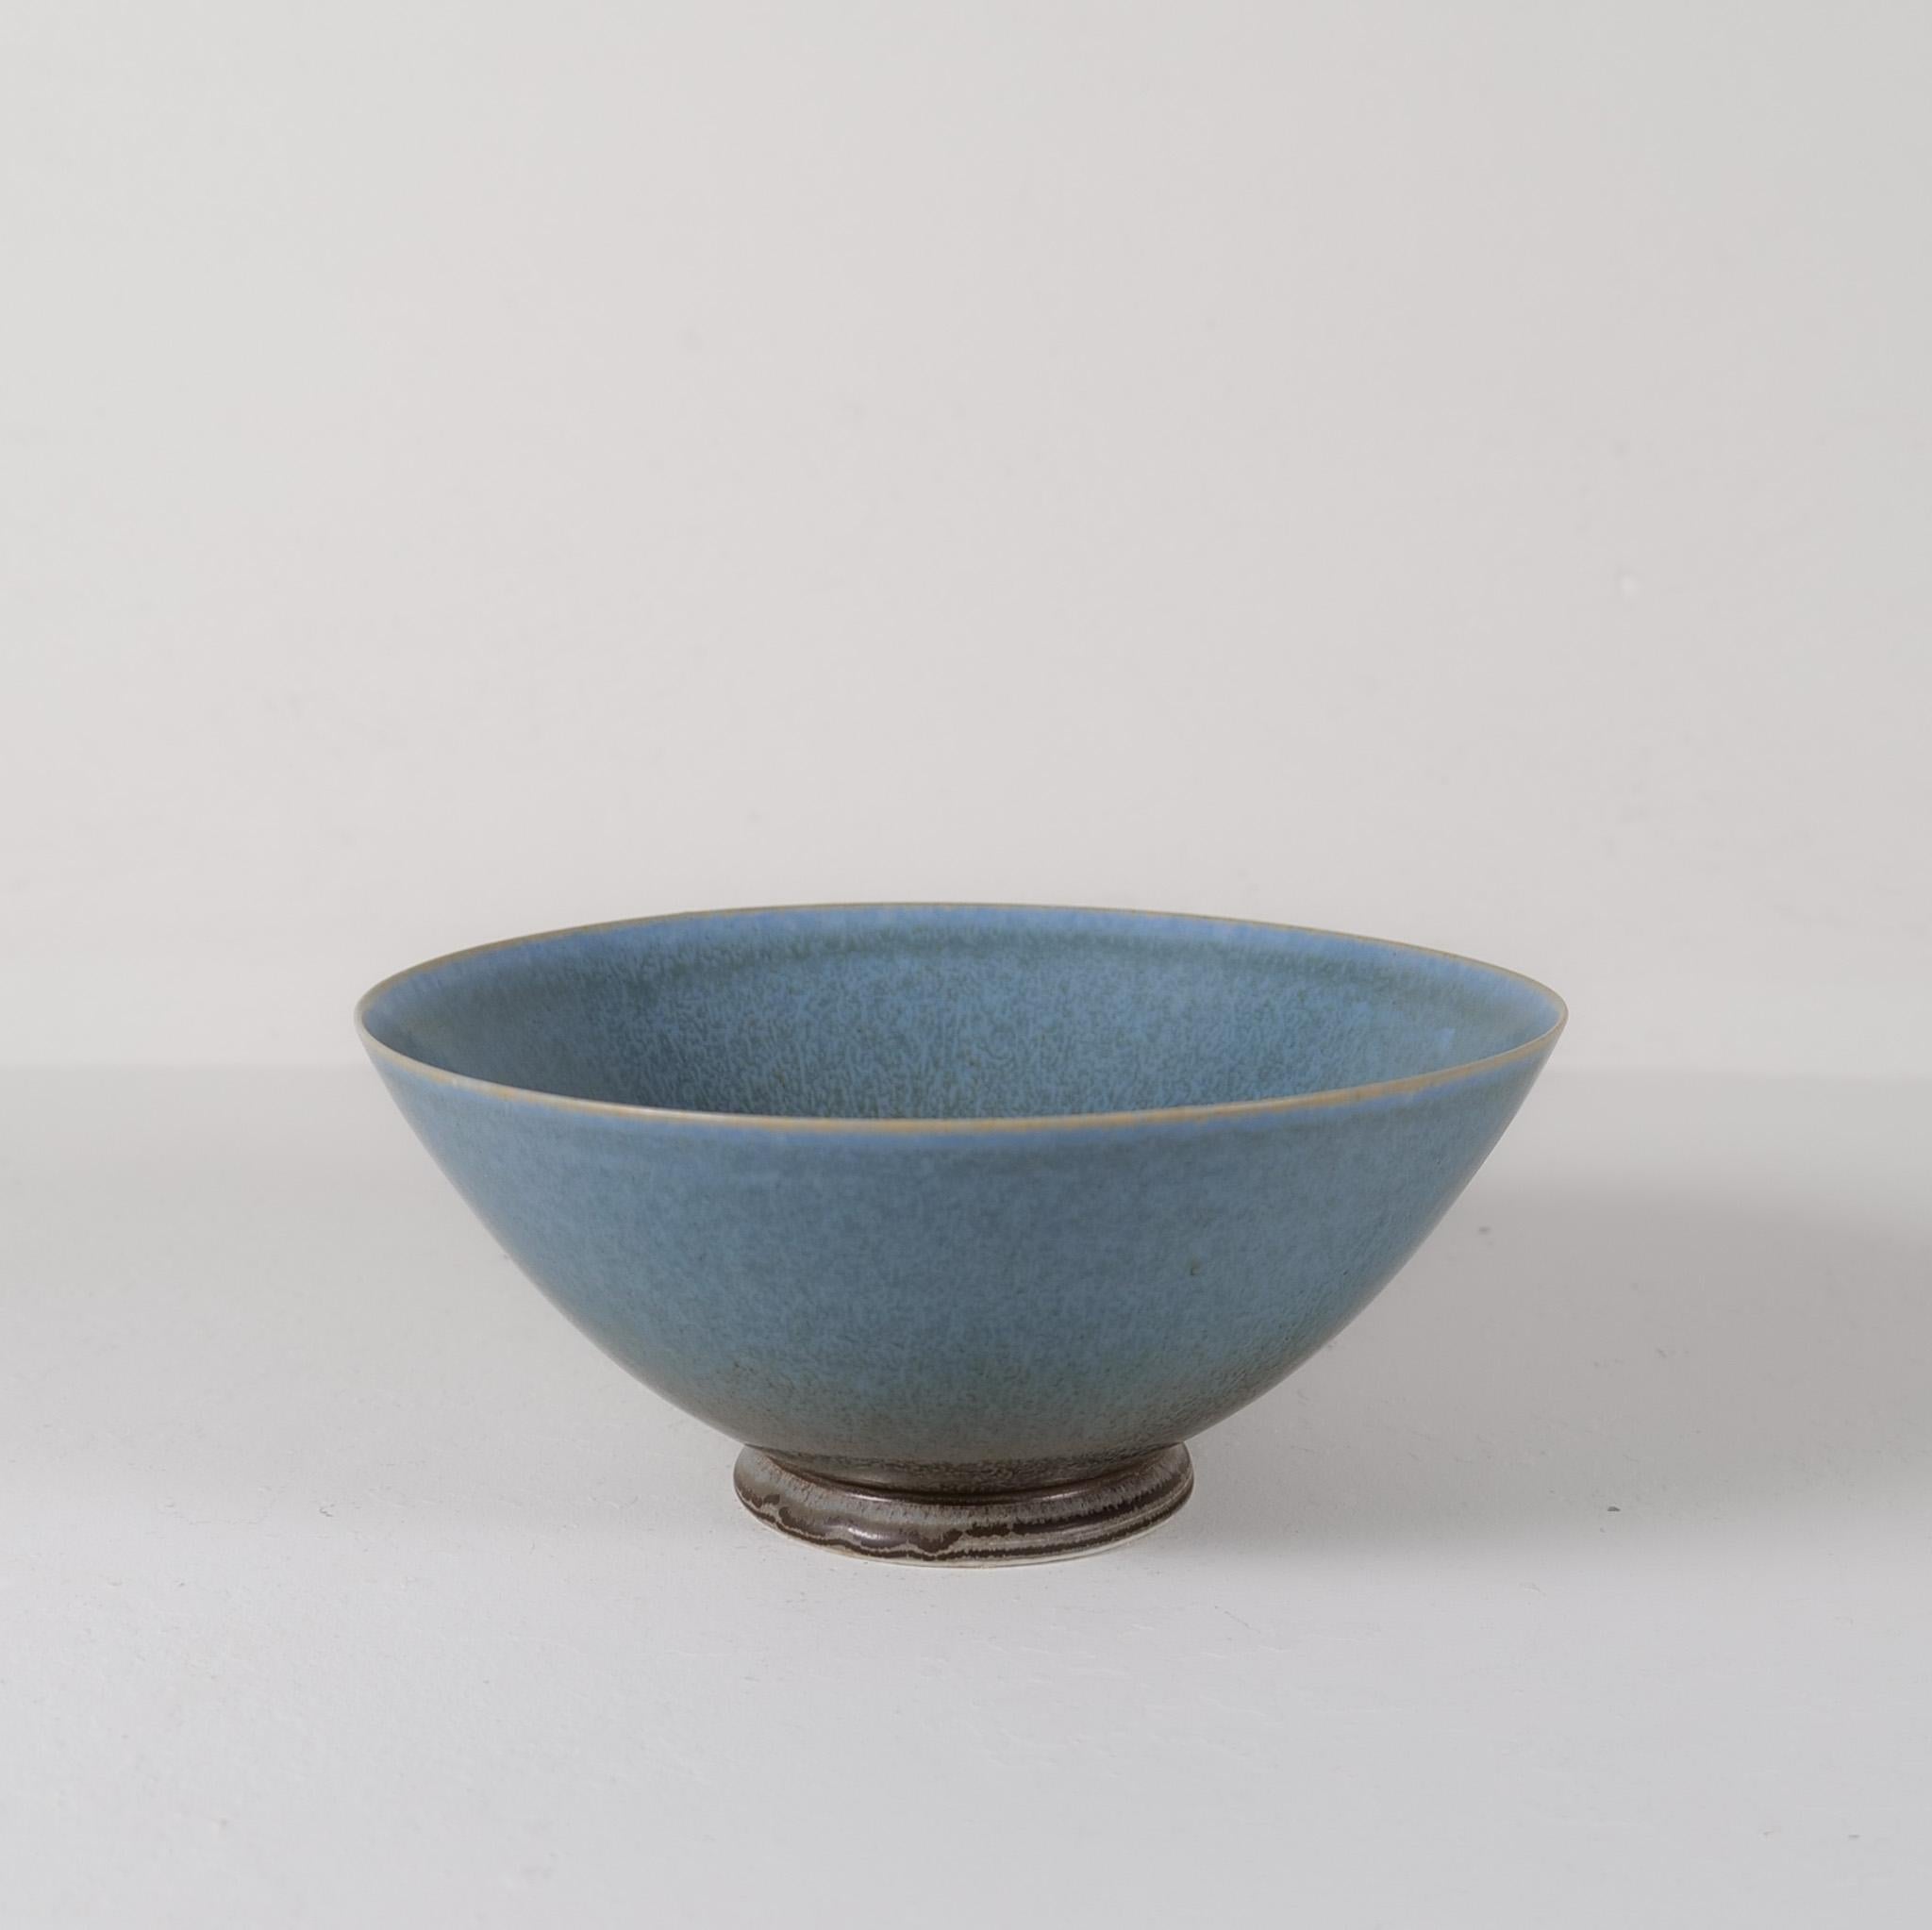 This bowl was handmade and glazed in the G-studio factory at Gustavsberg by Sven Wejsfelt. At the K-studio designers was given the spirit to produce unique art for Gustavsberg. 
The bowl is perfectly shaped and has a wonderful green /blue